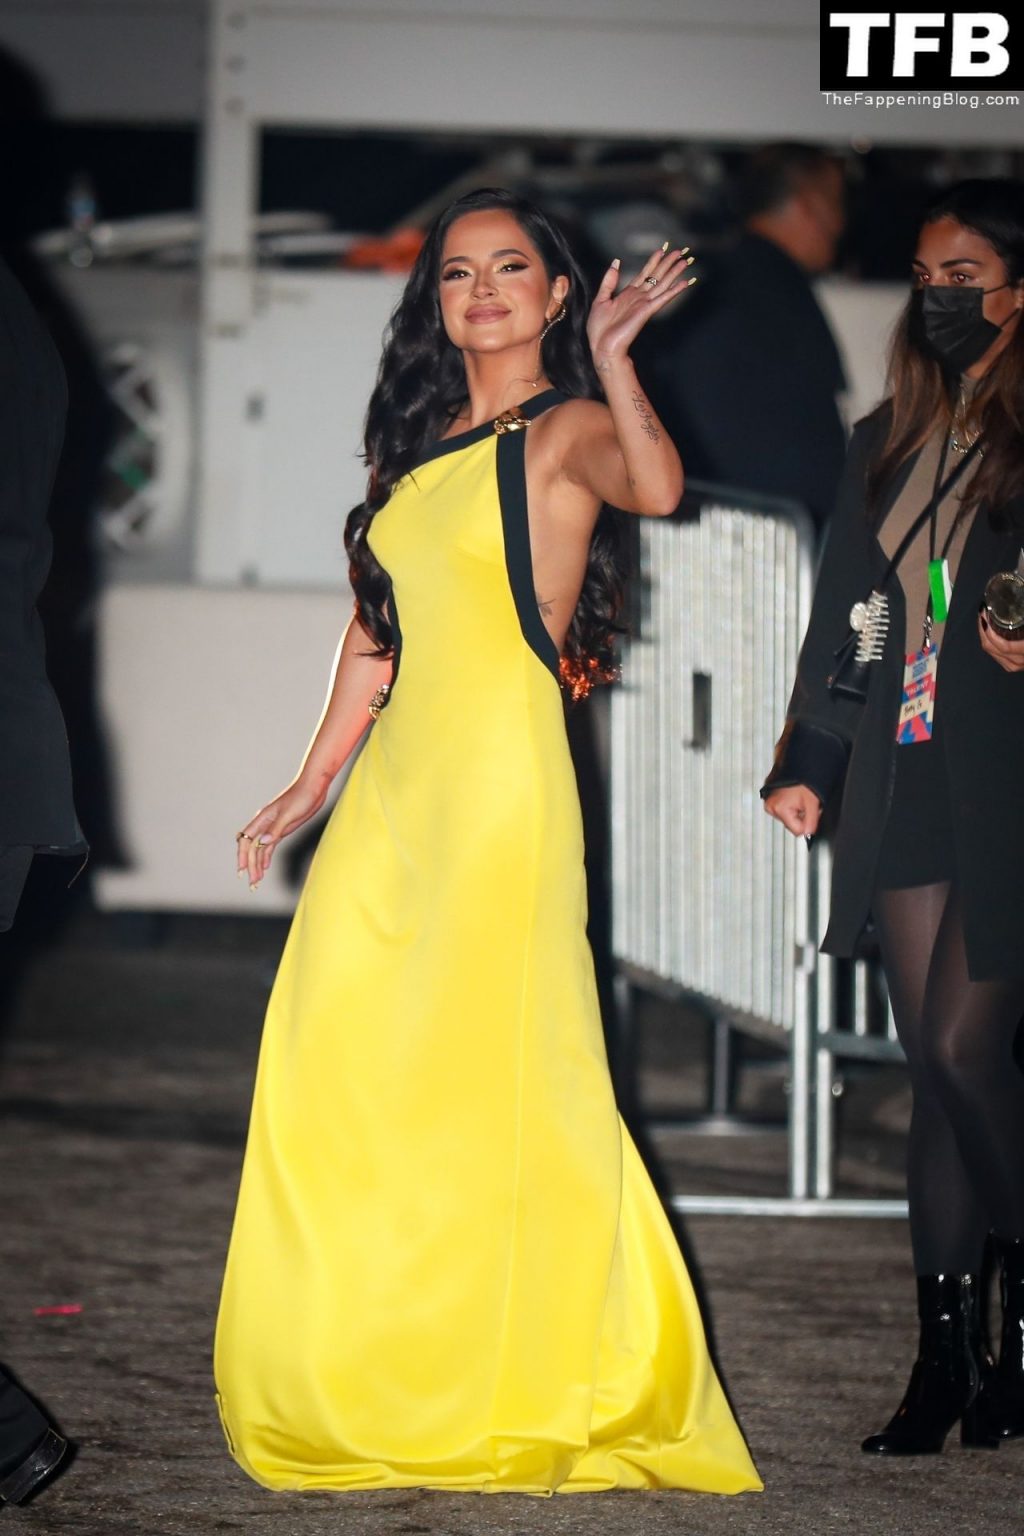 Leggy Becky G Looks Hot in a Yellow Dress at the 2021 E! People’s Choice Awards (36 Photos)